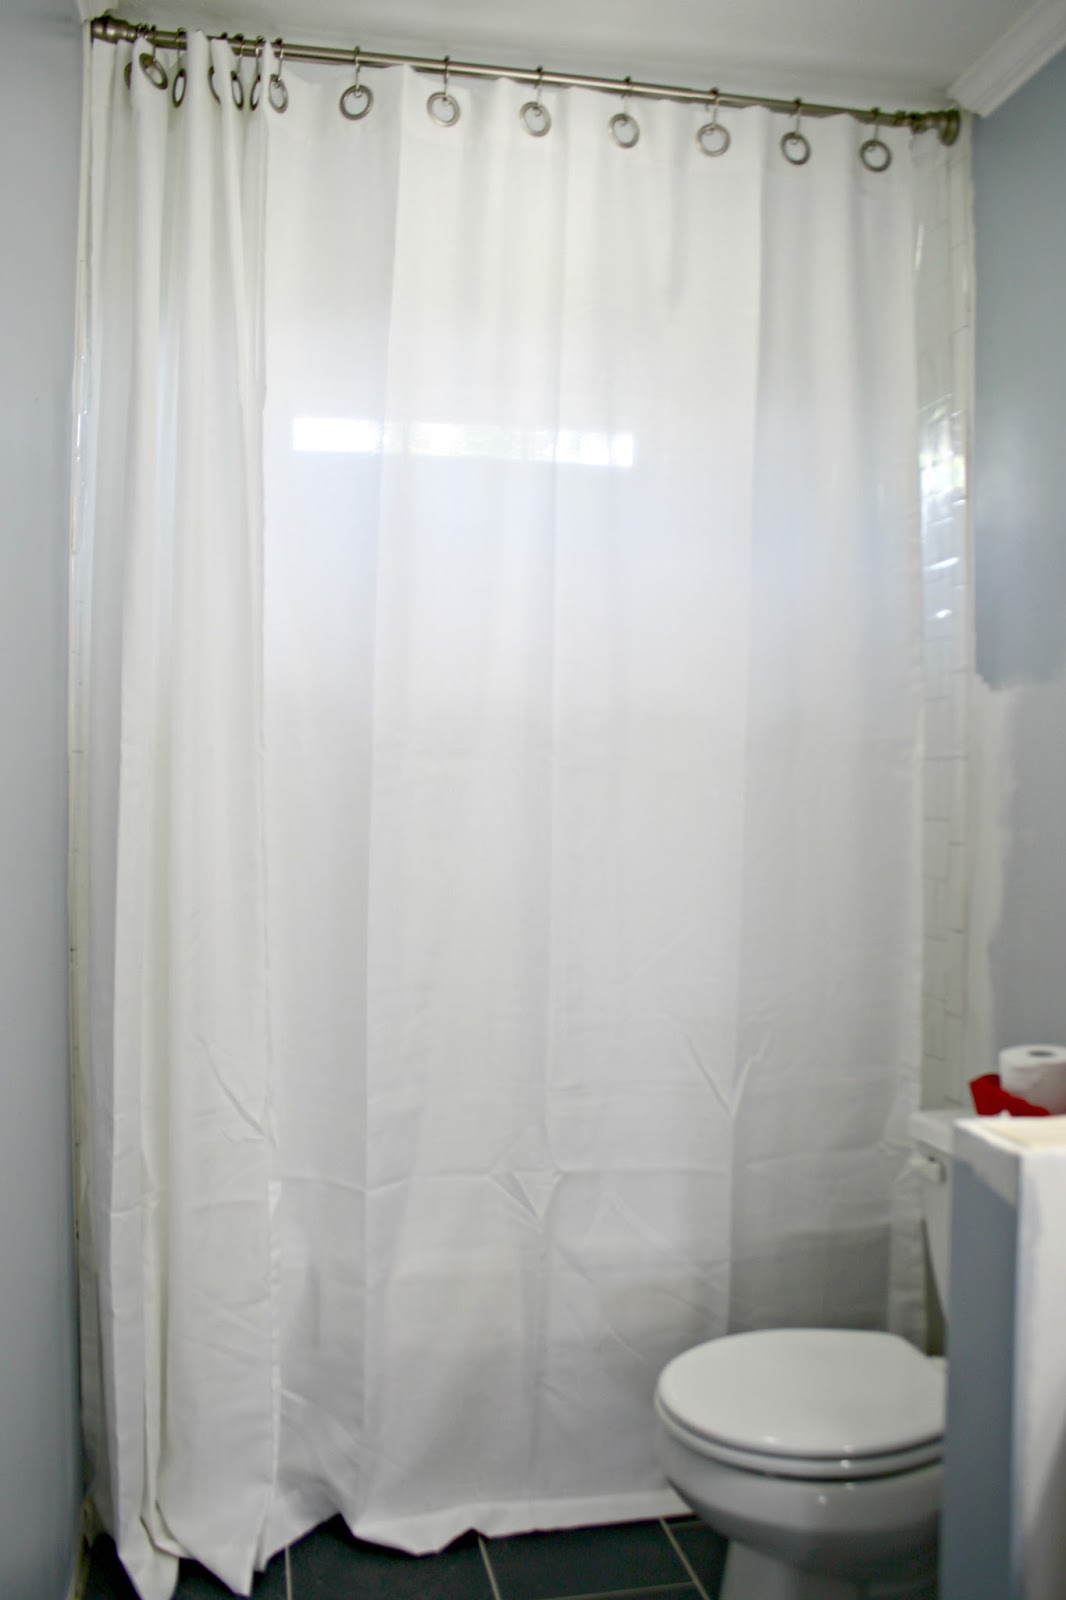 How to hang double shower curtains (for less!), Thrifty Decor Chick